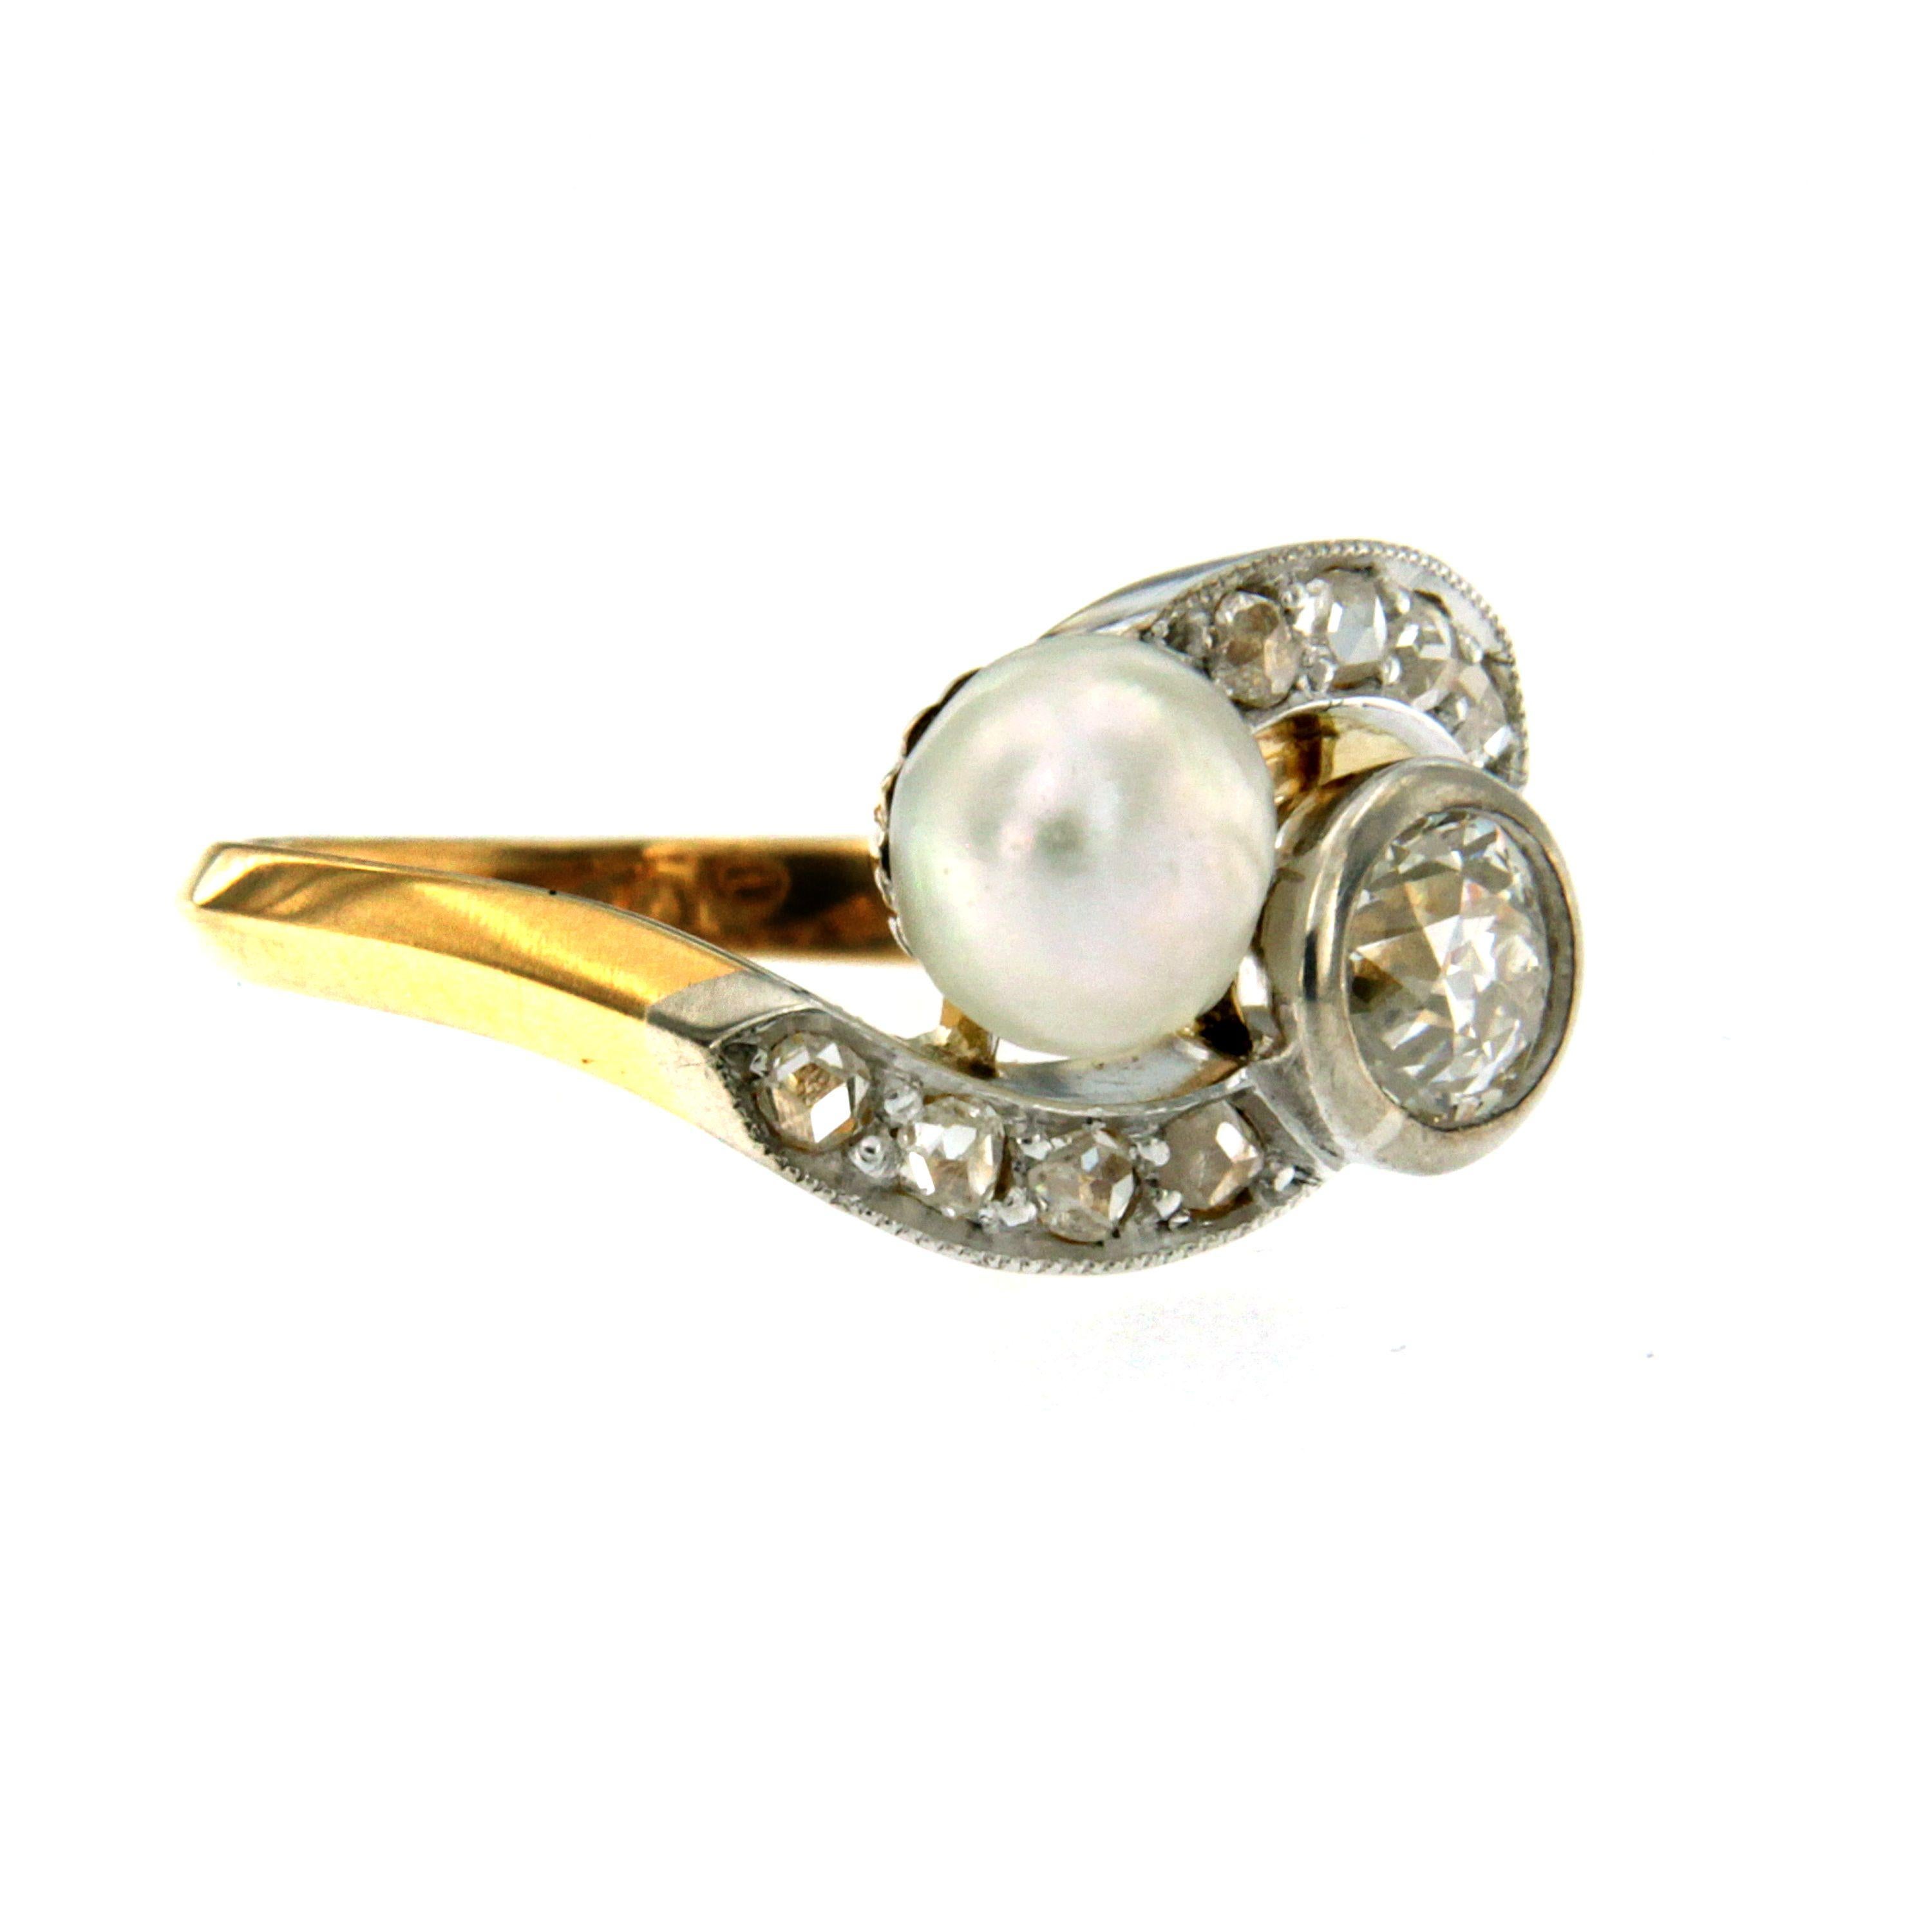 A beautiful 18k gold 'Vous et Moi' ring set with an old mine cut diamond weighing 0.40 carat I color VS2 clarity and a natural pearl, surrounded by 0.15ct old mine diamond. Late 1800

CONDITION: Pre-owned - Excellent 
METAL: 18k Gold 
GEM STONE: